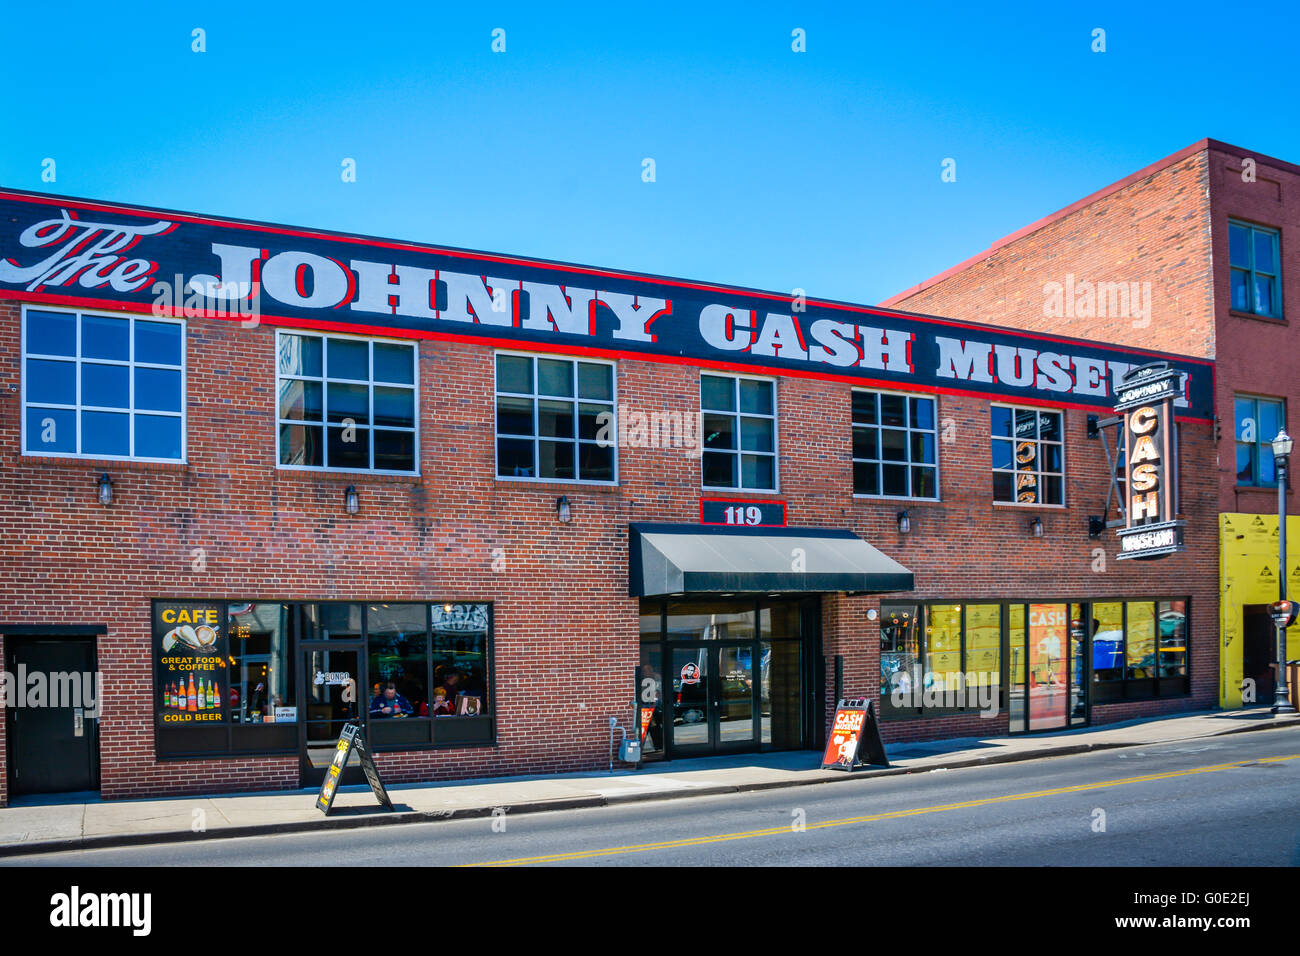 A highlight for fans, the Johnny Cash Museum in Nashville TN is housed in an old historical brick building in colorful downtown Stock Photo